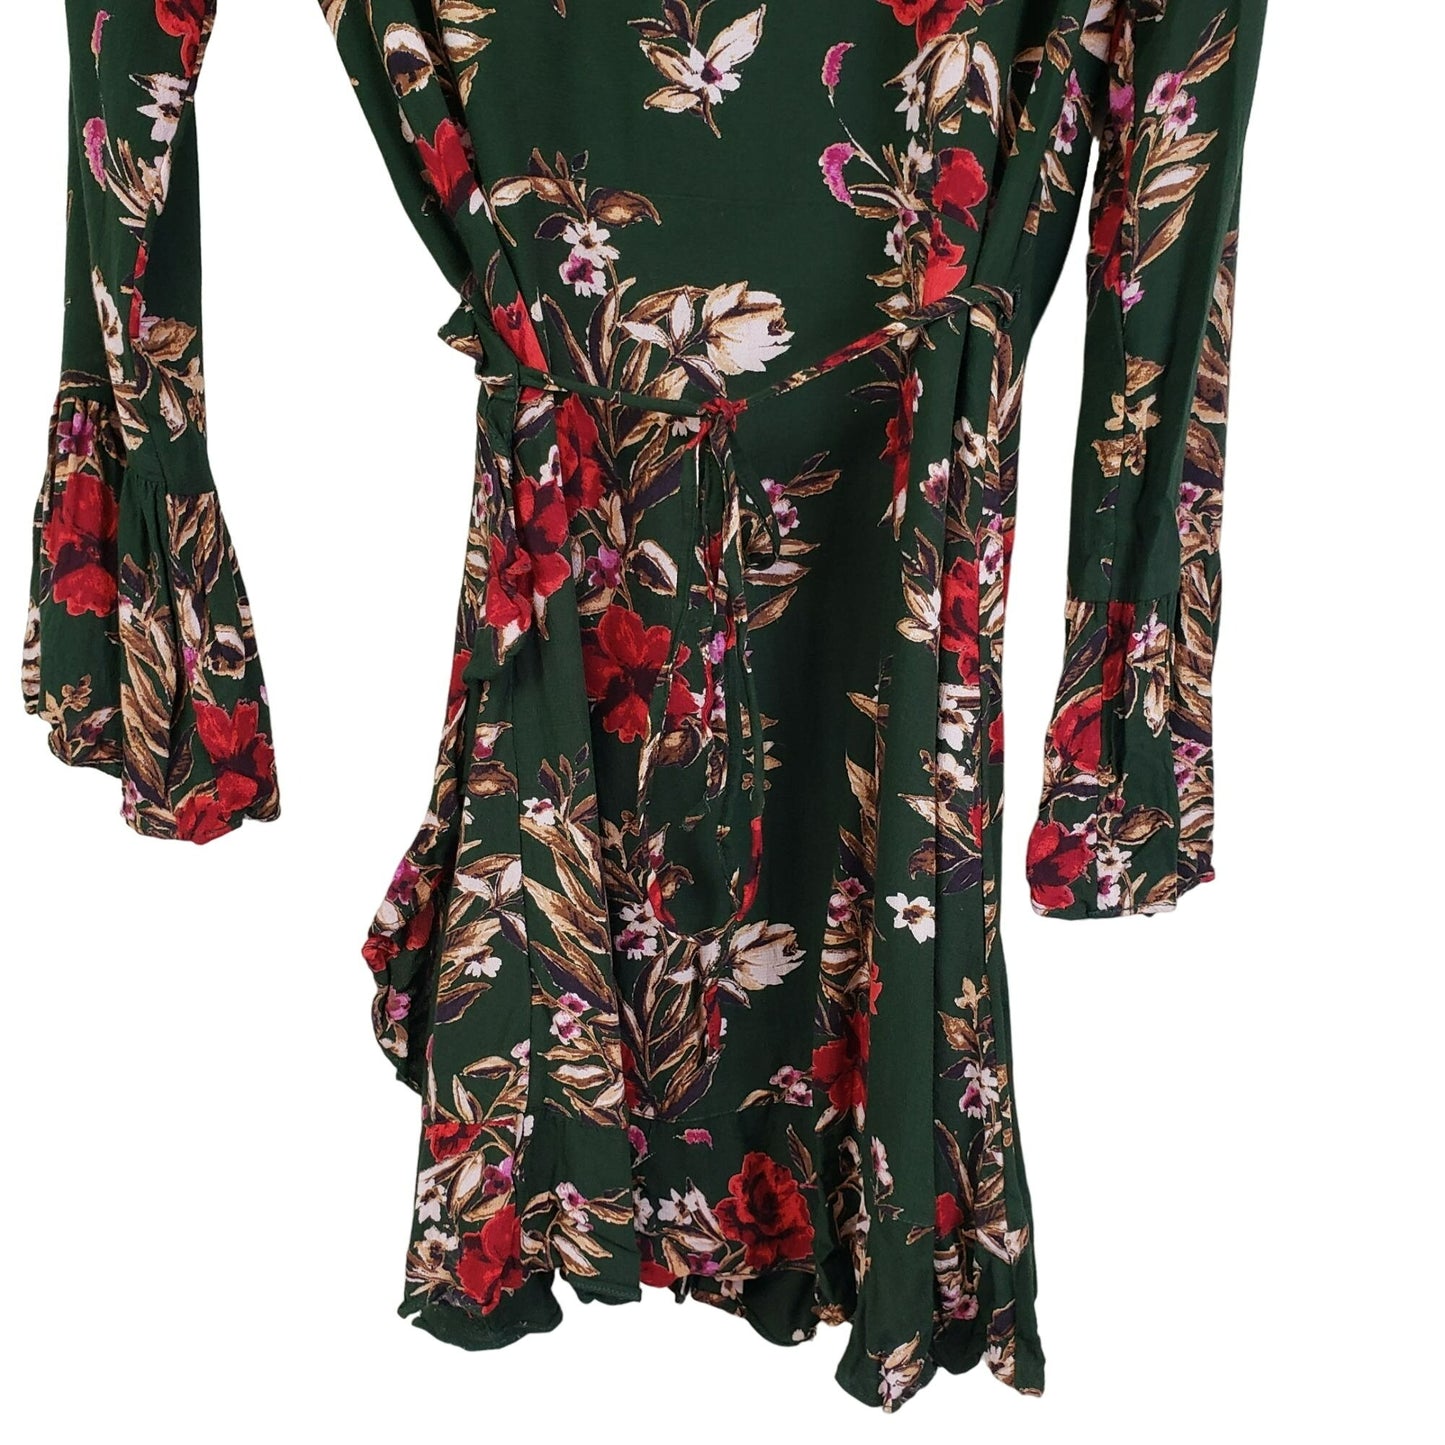 Urban Outfitters Pins & Needles Floral Wrap Dress Size Medium